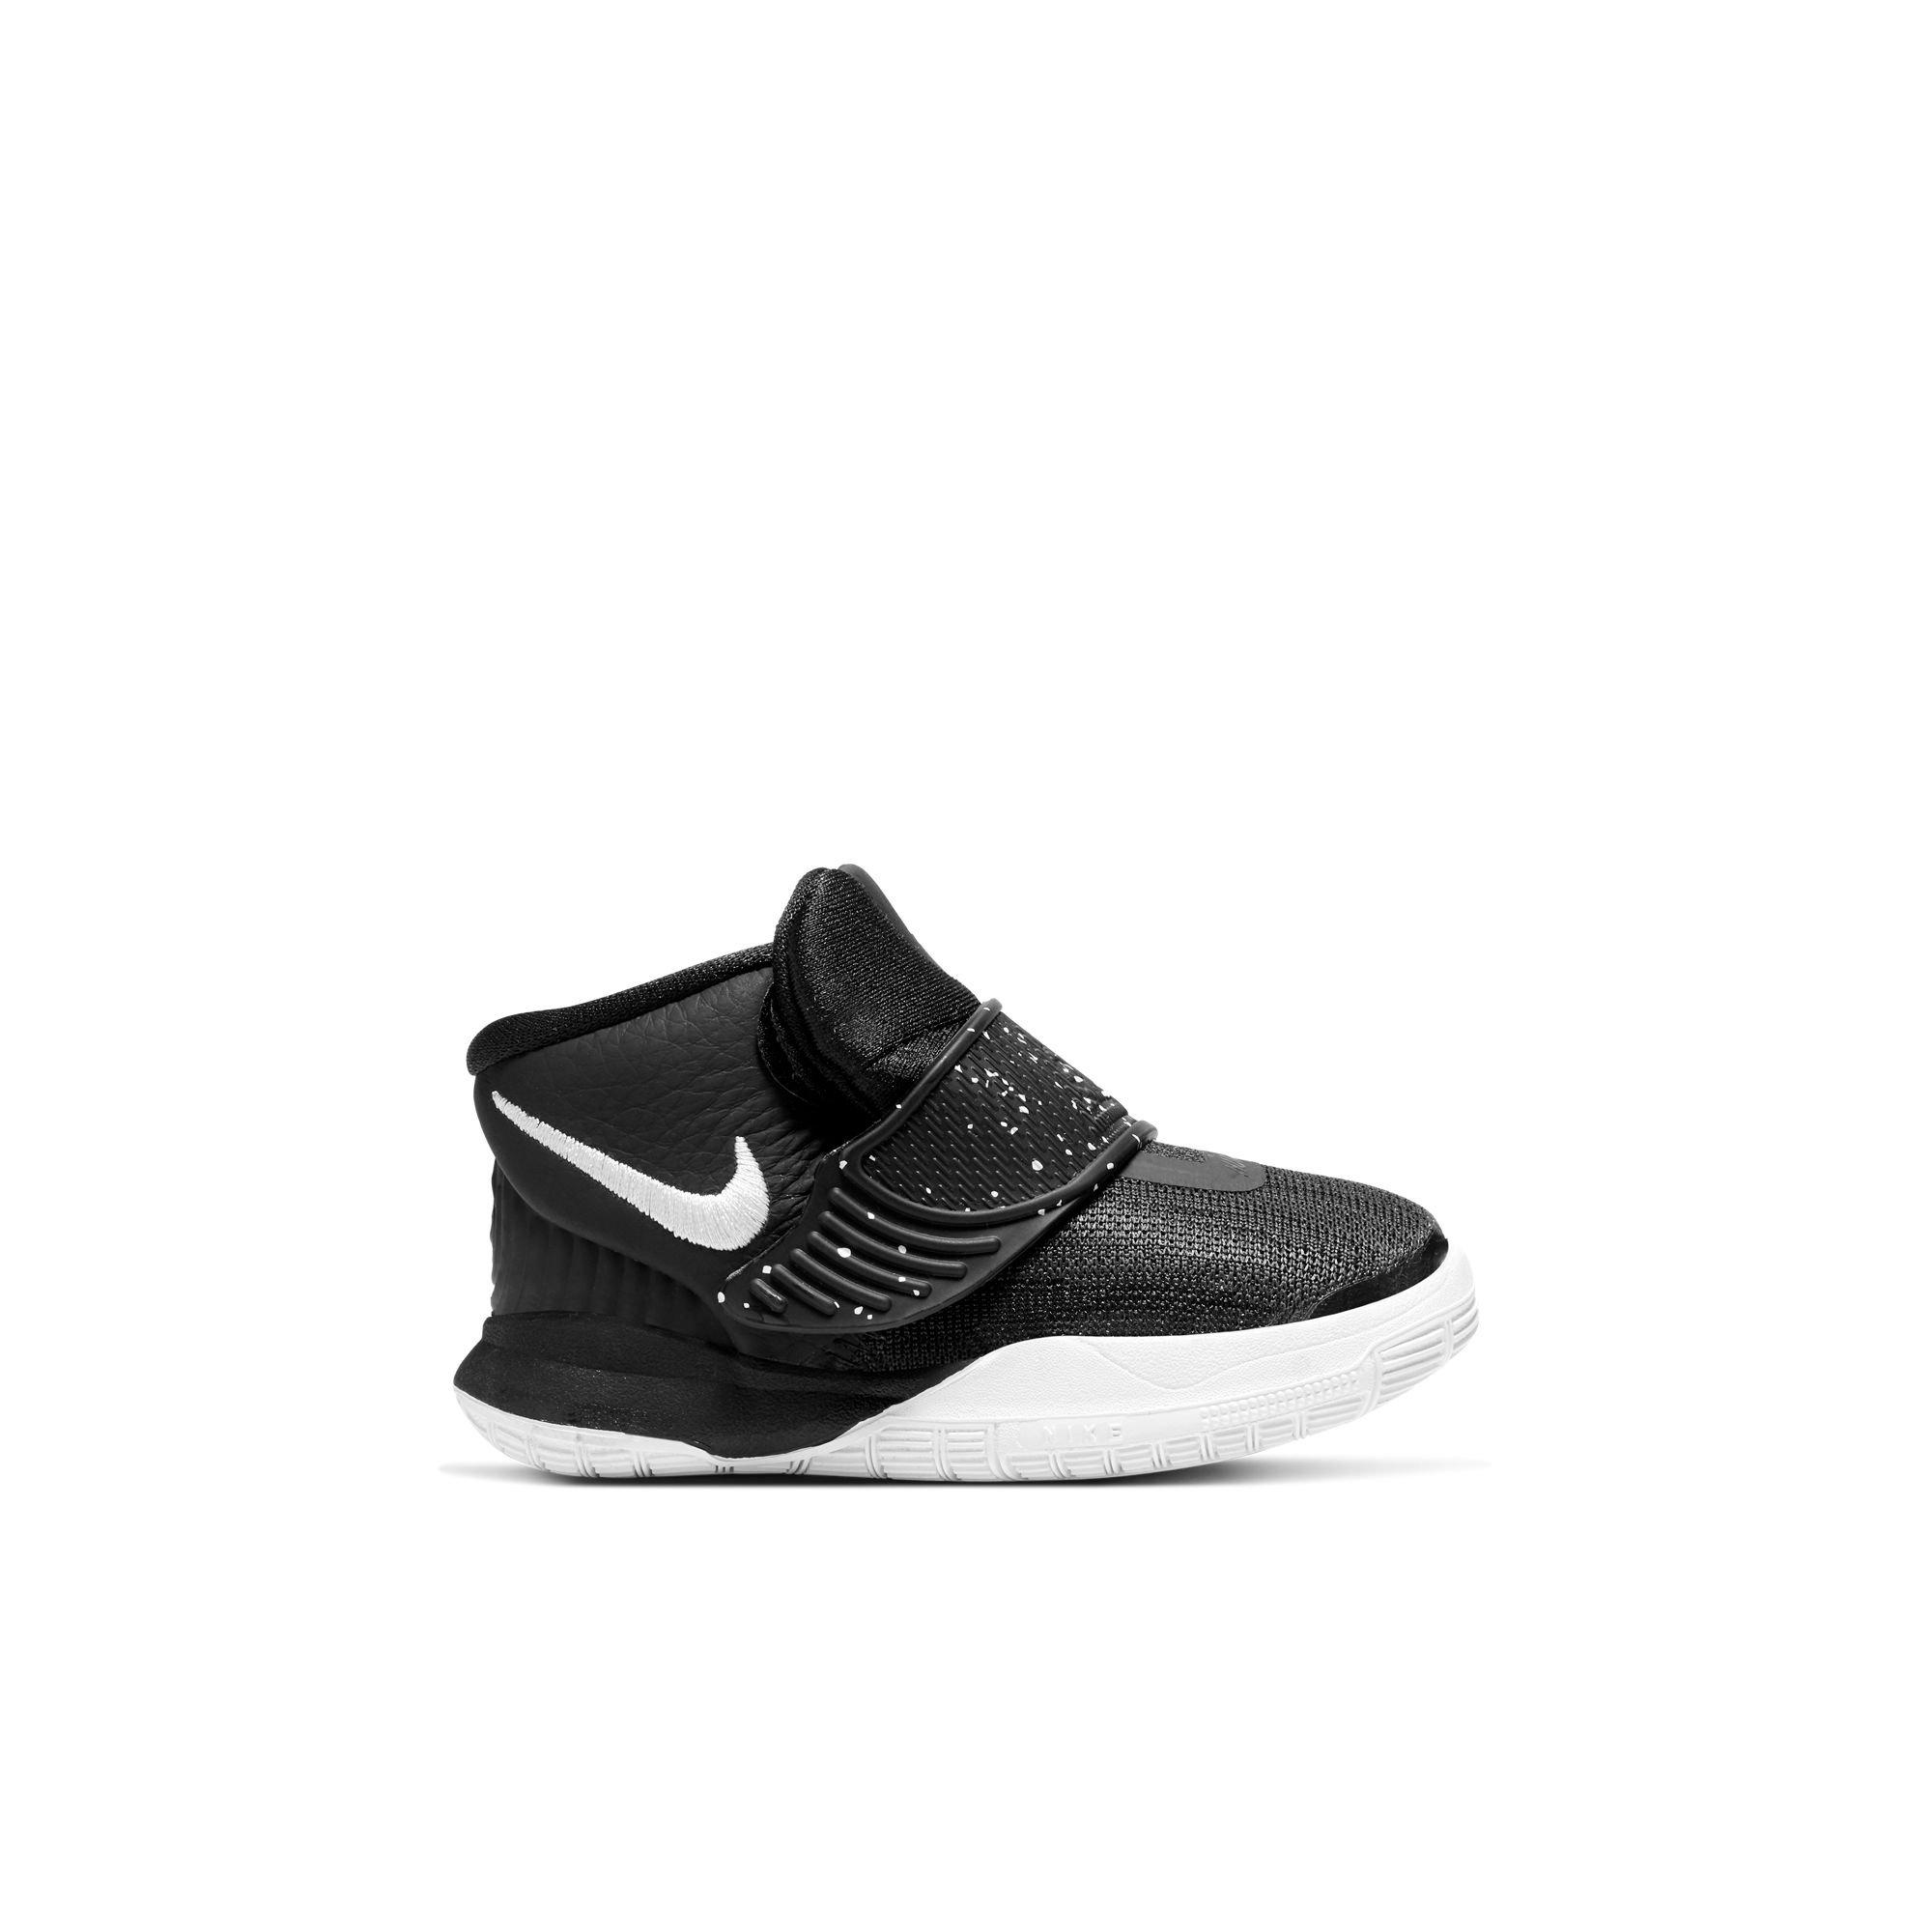 kyrie irving shoes toddler